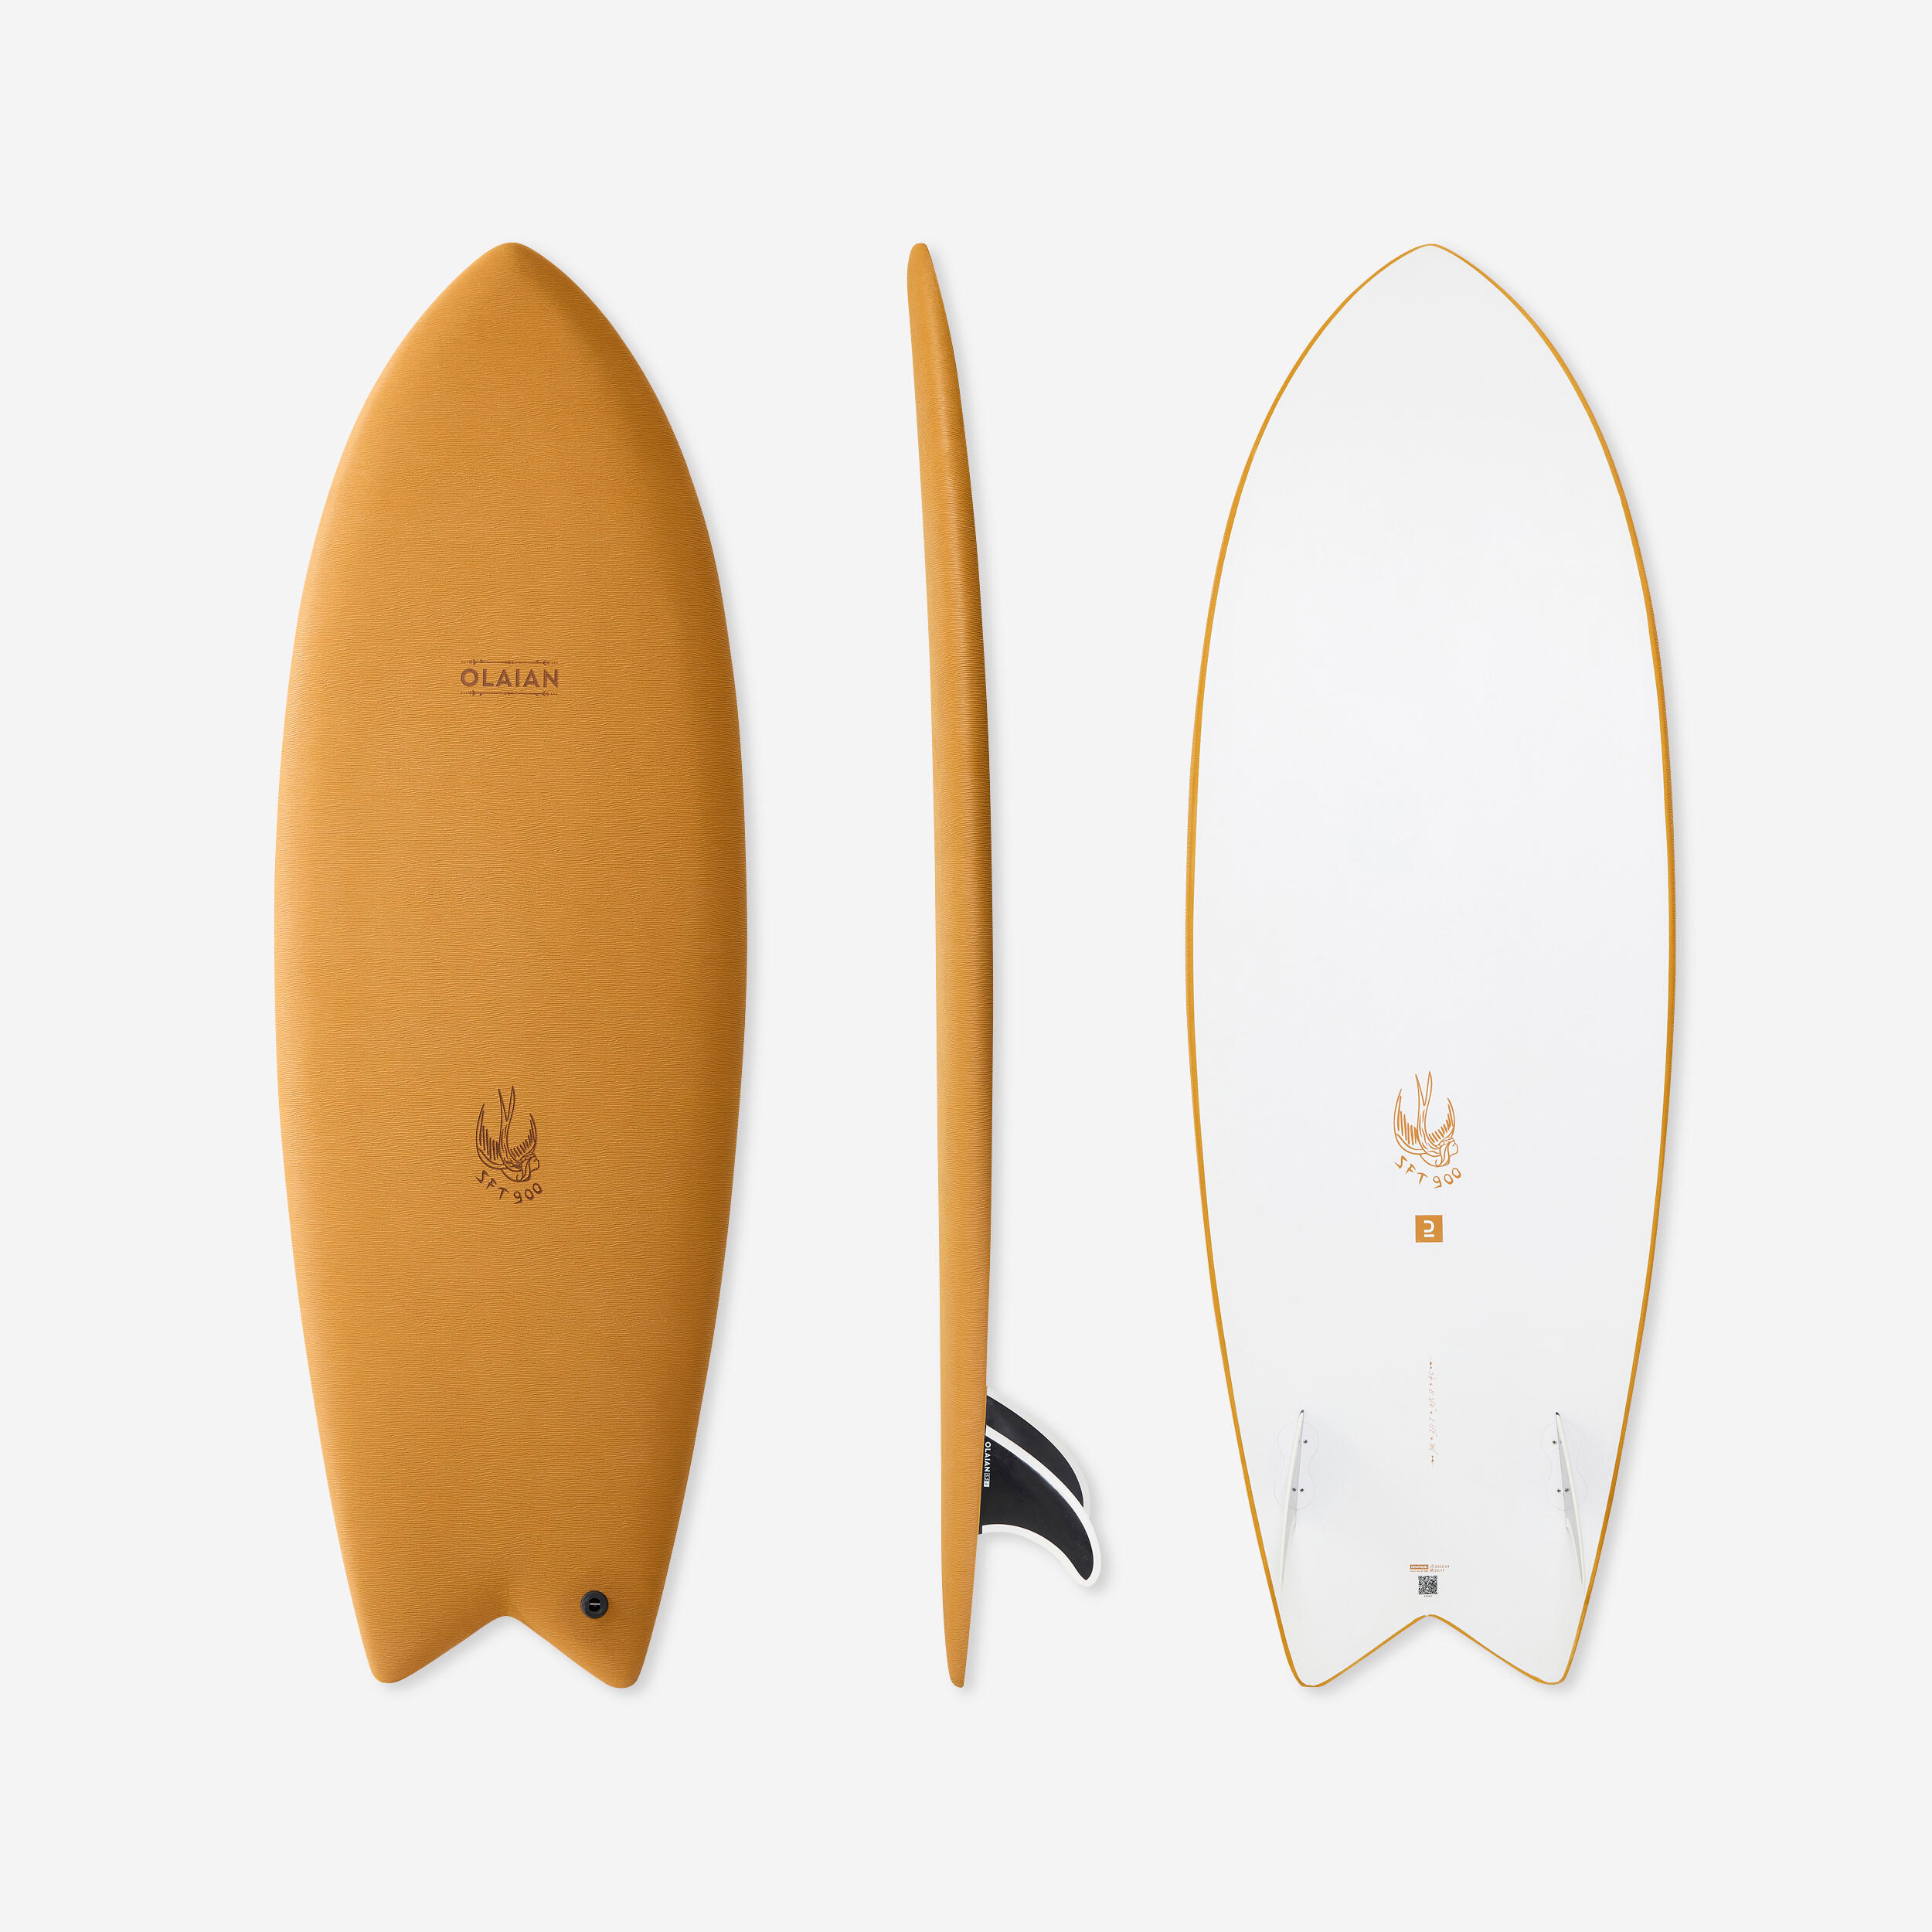 OLAIAN SURFBOARD 900 EPOXY SOFT 5'6 - Supplied with 2 fins